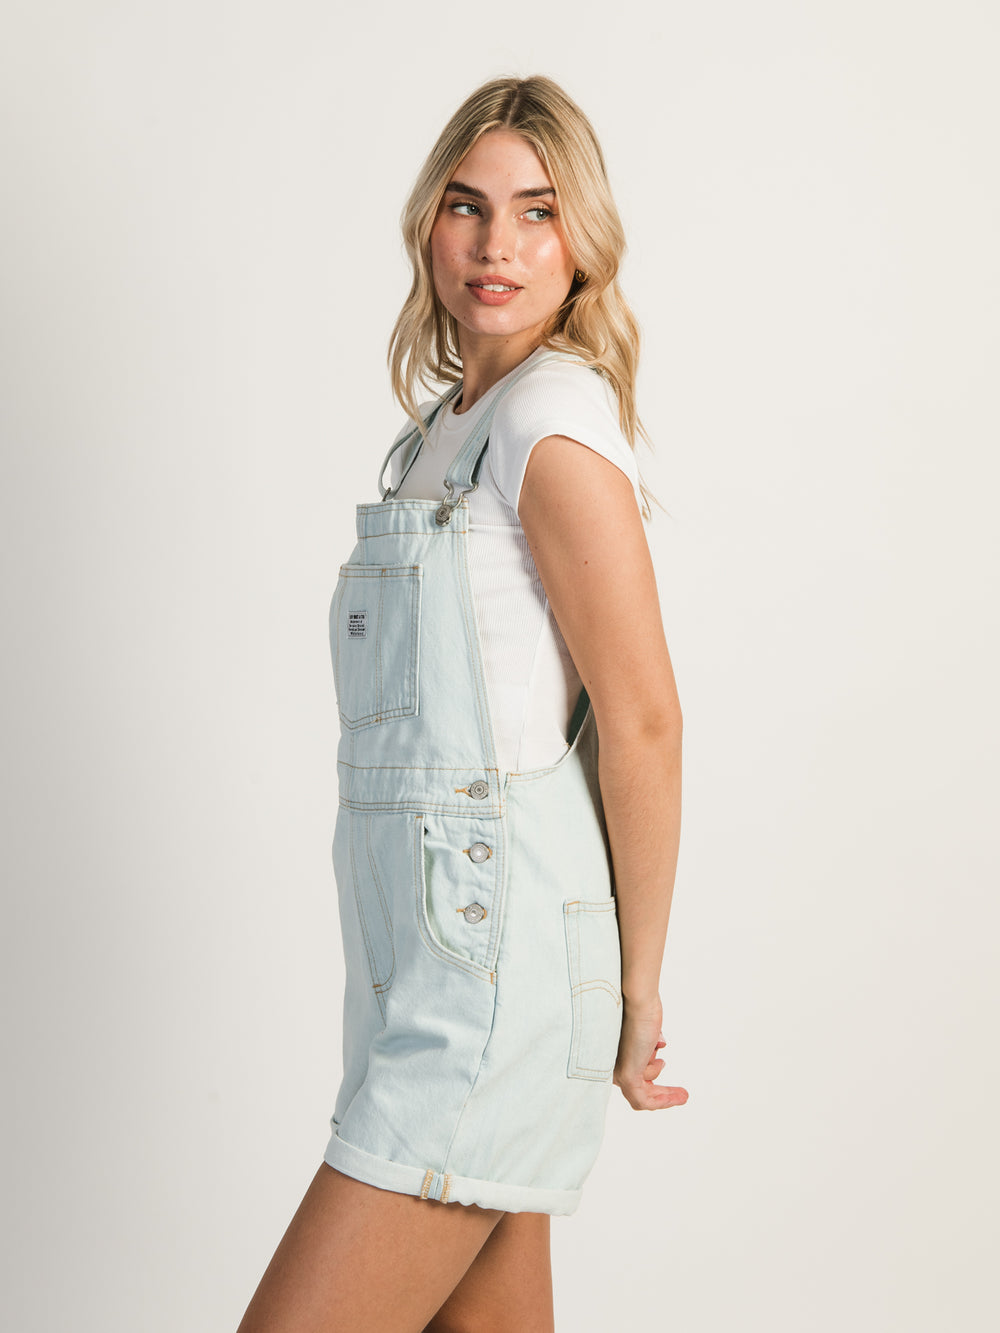 LEVIS VINTAGE SHORTALL - CHANGING EXPECTIONS